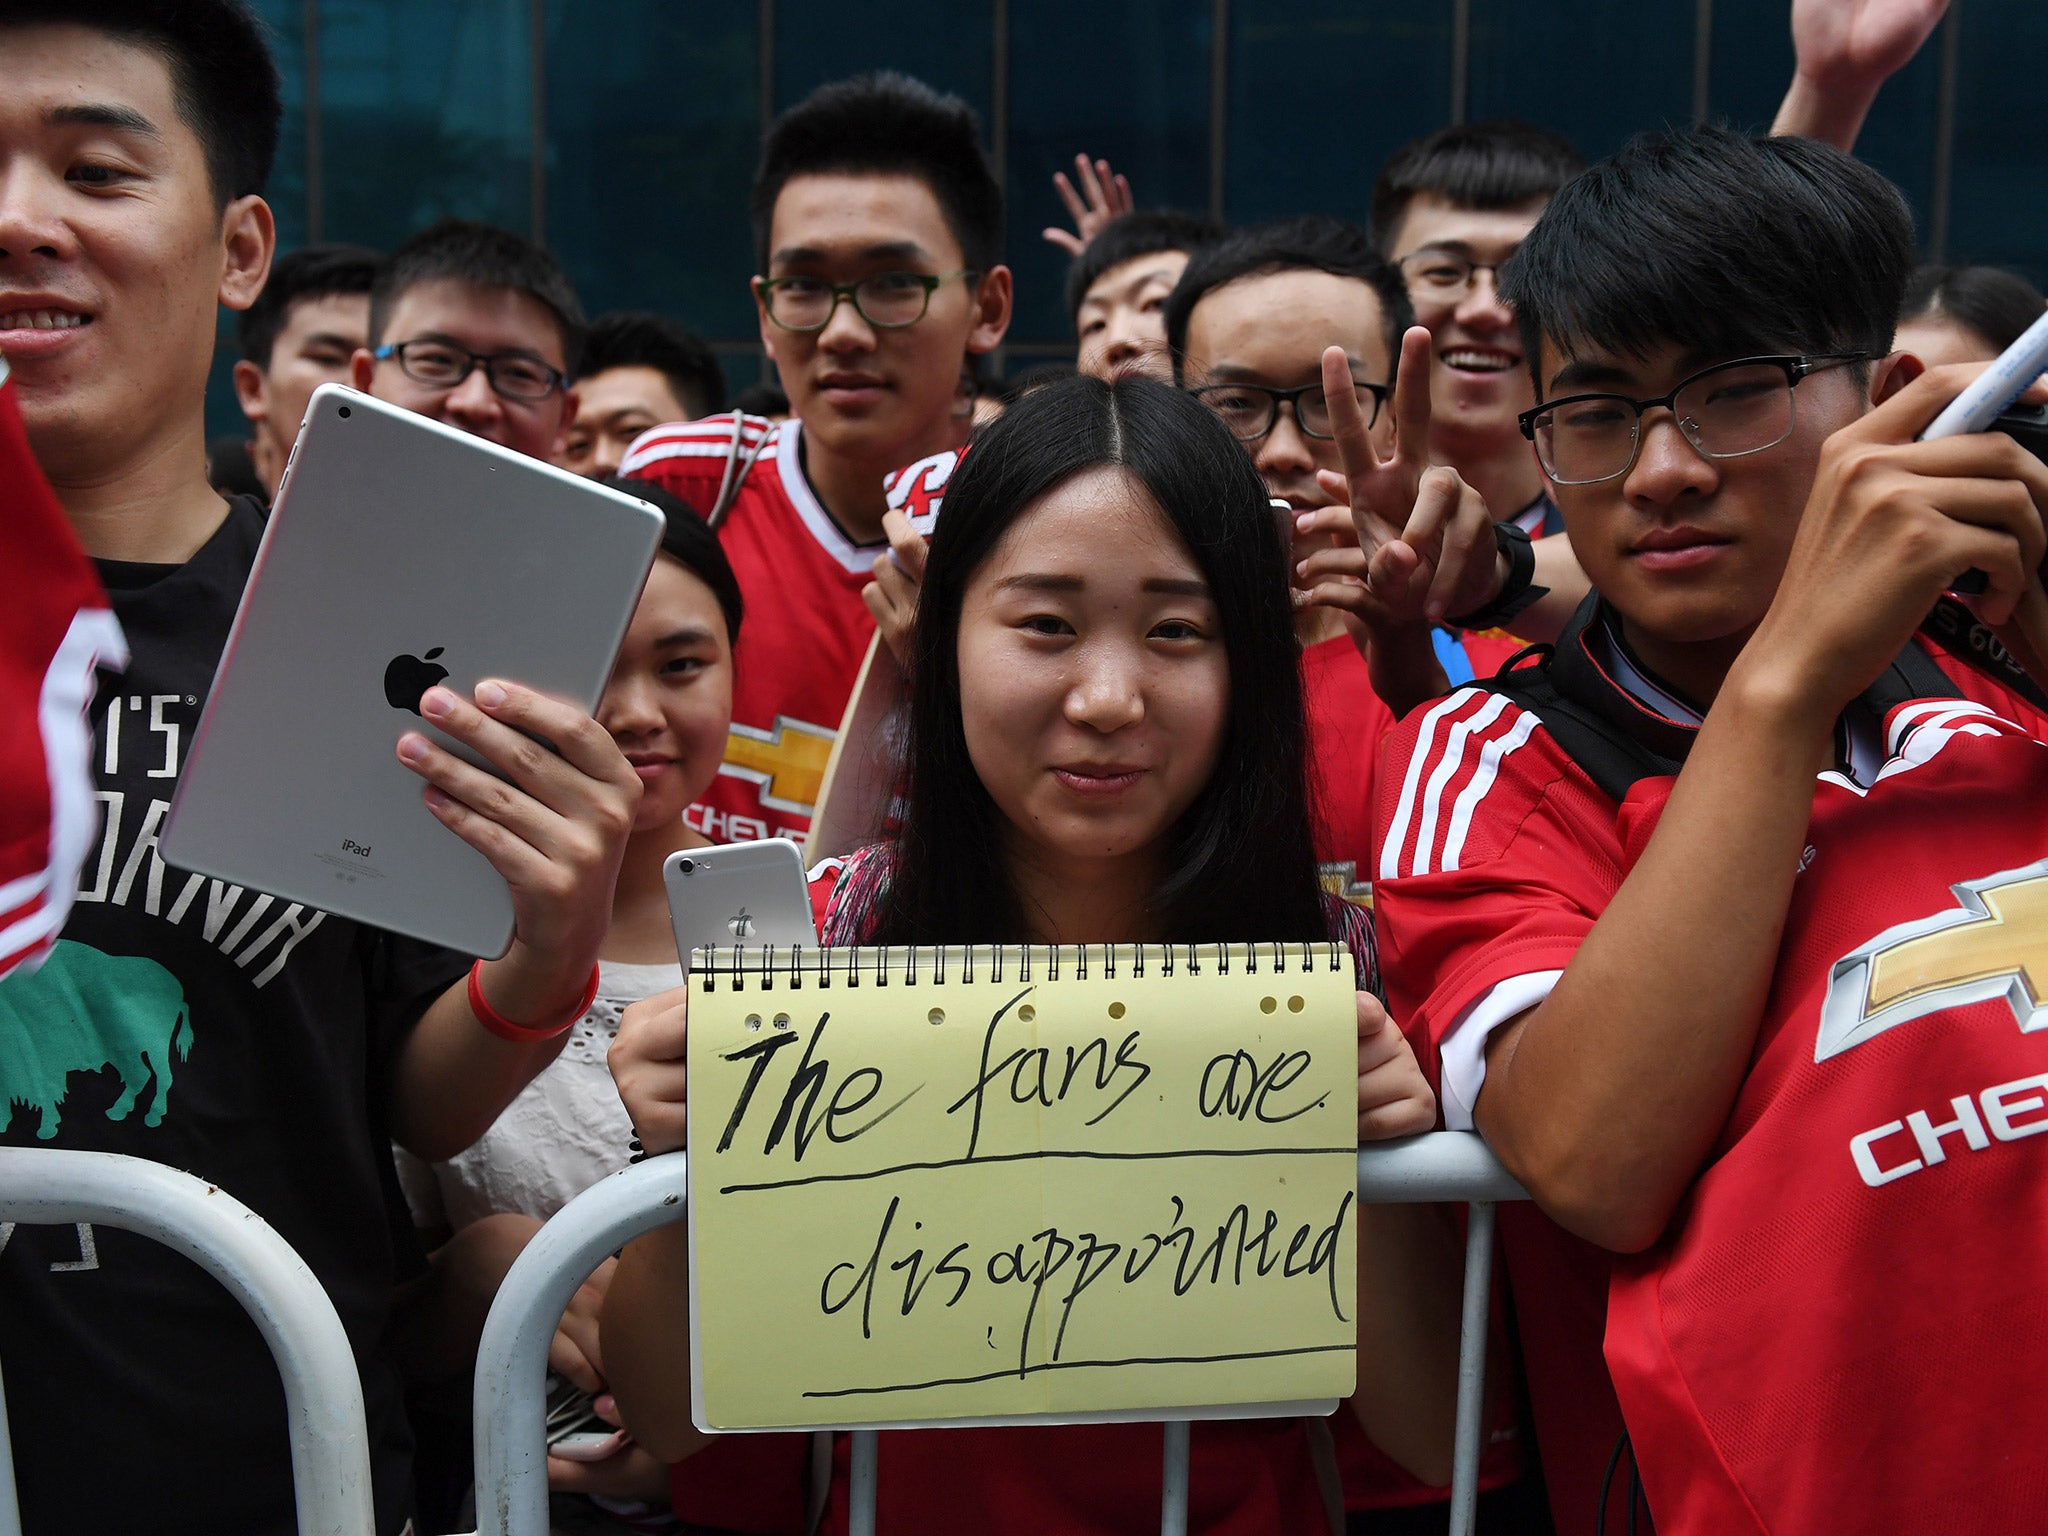 Premier League football is popular in China